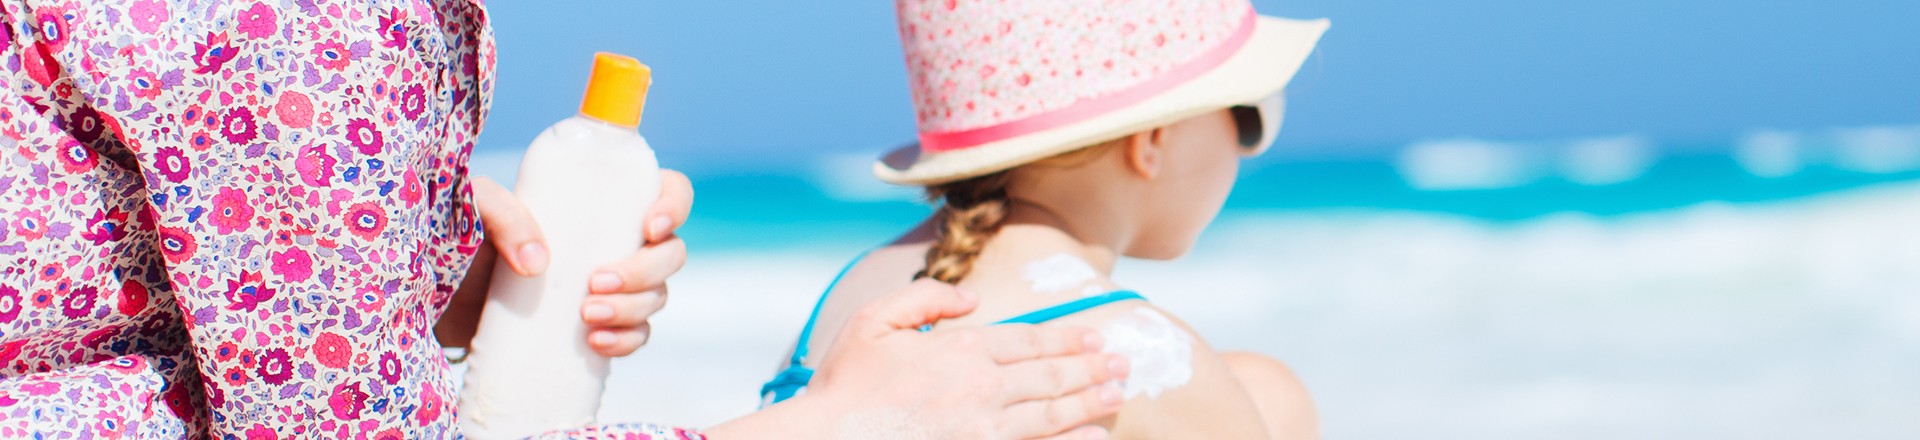 Is sunscreen safe? Many sunscreens contain harmful toxins, but zinc oxide sunscreen is one of the safer options for you and your children.